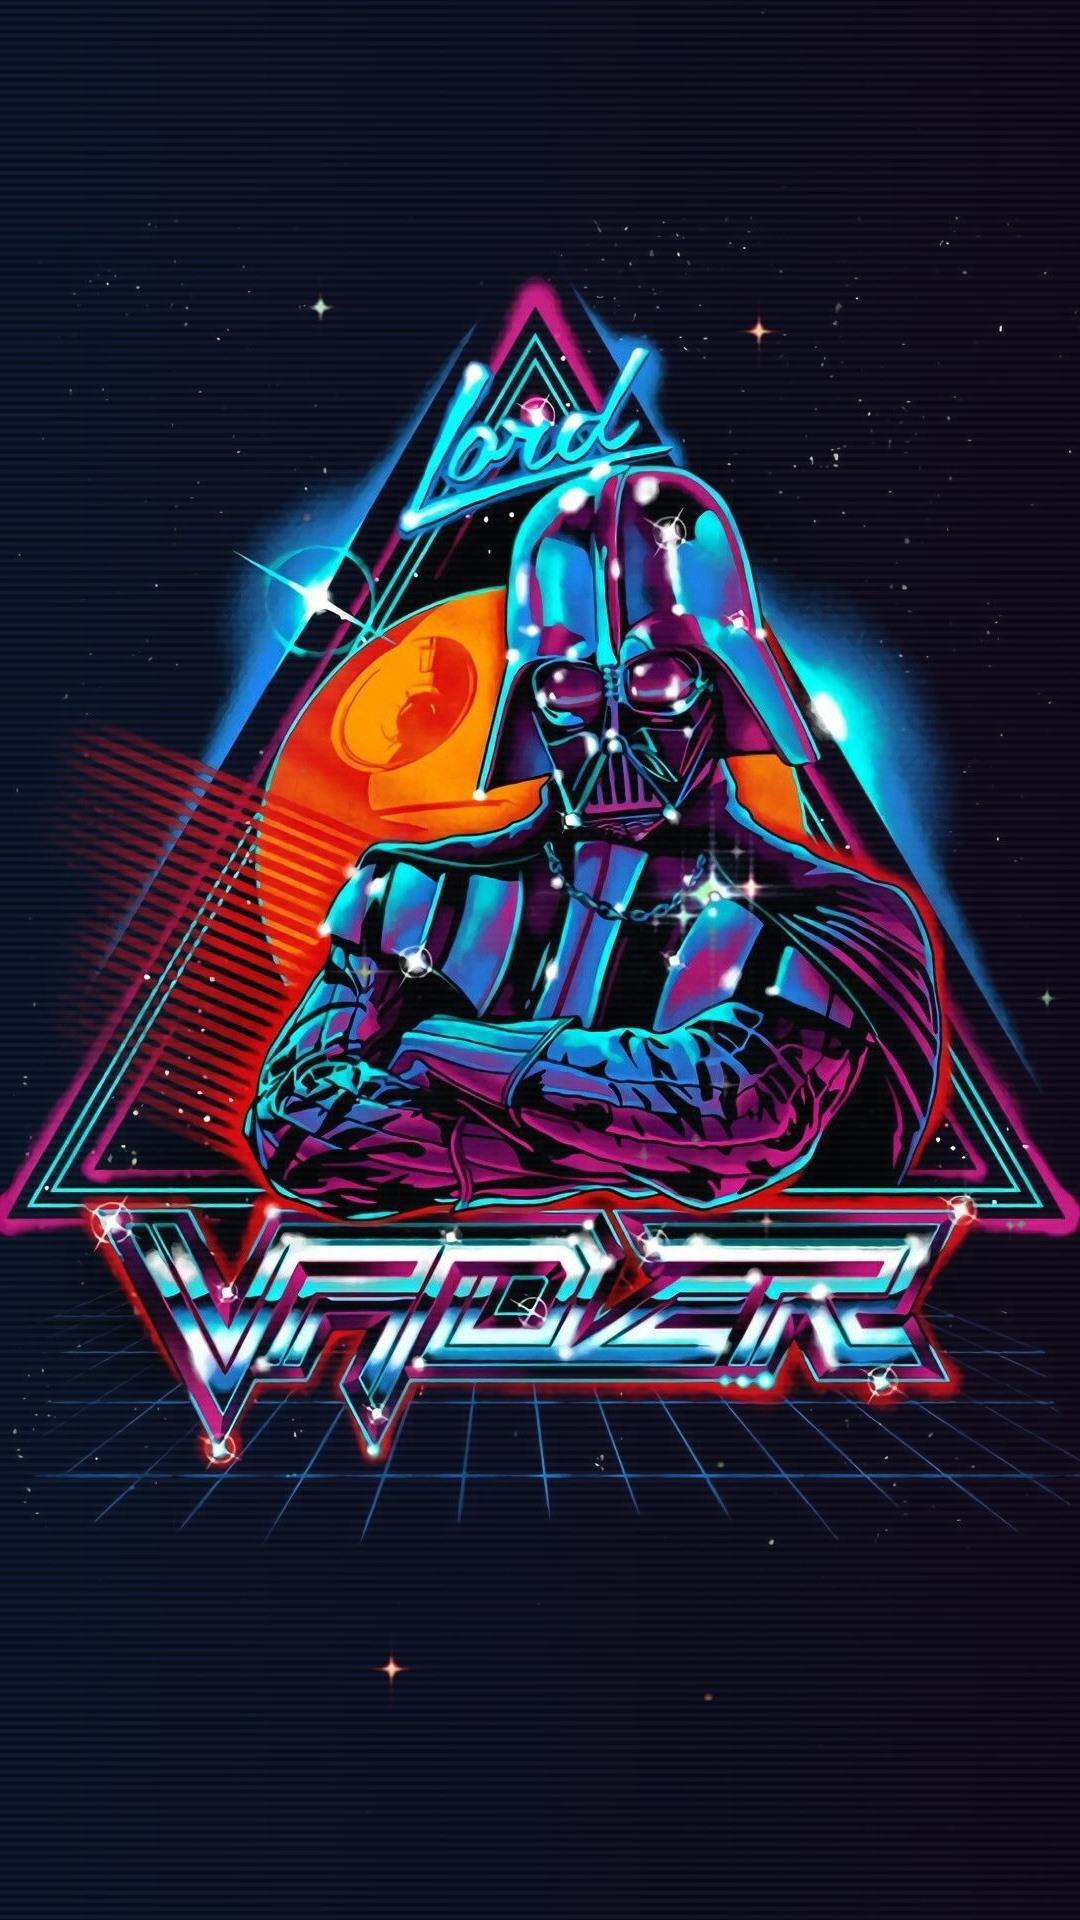 Free download Star Wars Darth Vader art picture black background 1080x1920 [1080x1920] for your Desktop, Mobile & Tablet. Explore Star Wars iPhone 7 Plus Wallpaper. Star Wars iPhone 7